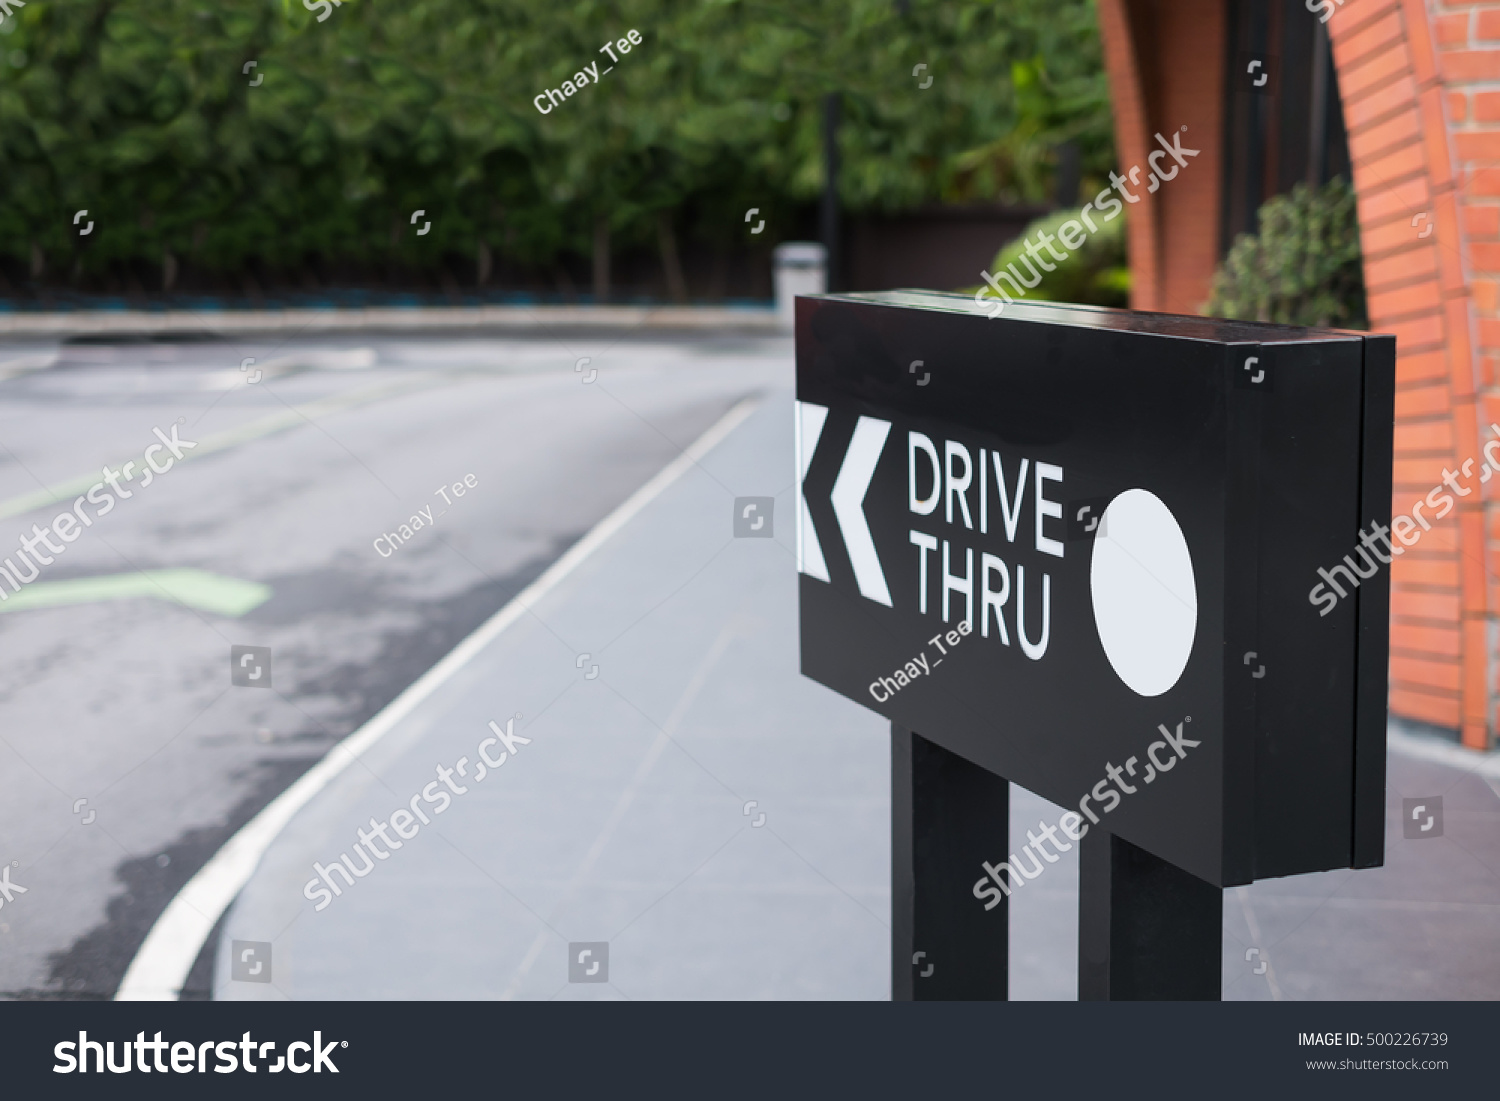 Drive thru sign with shop and road background. #500226739